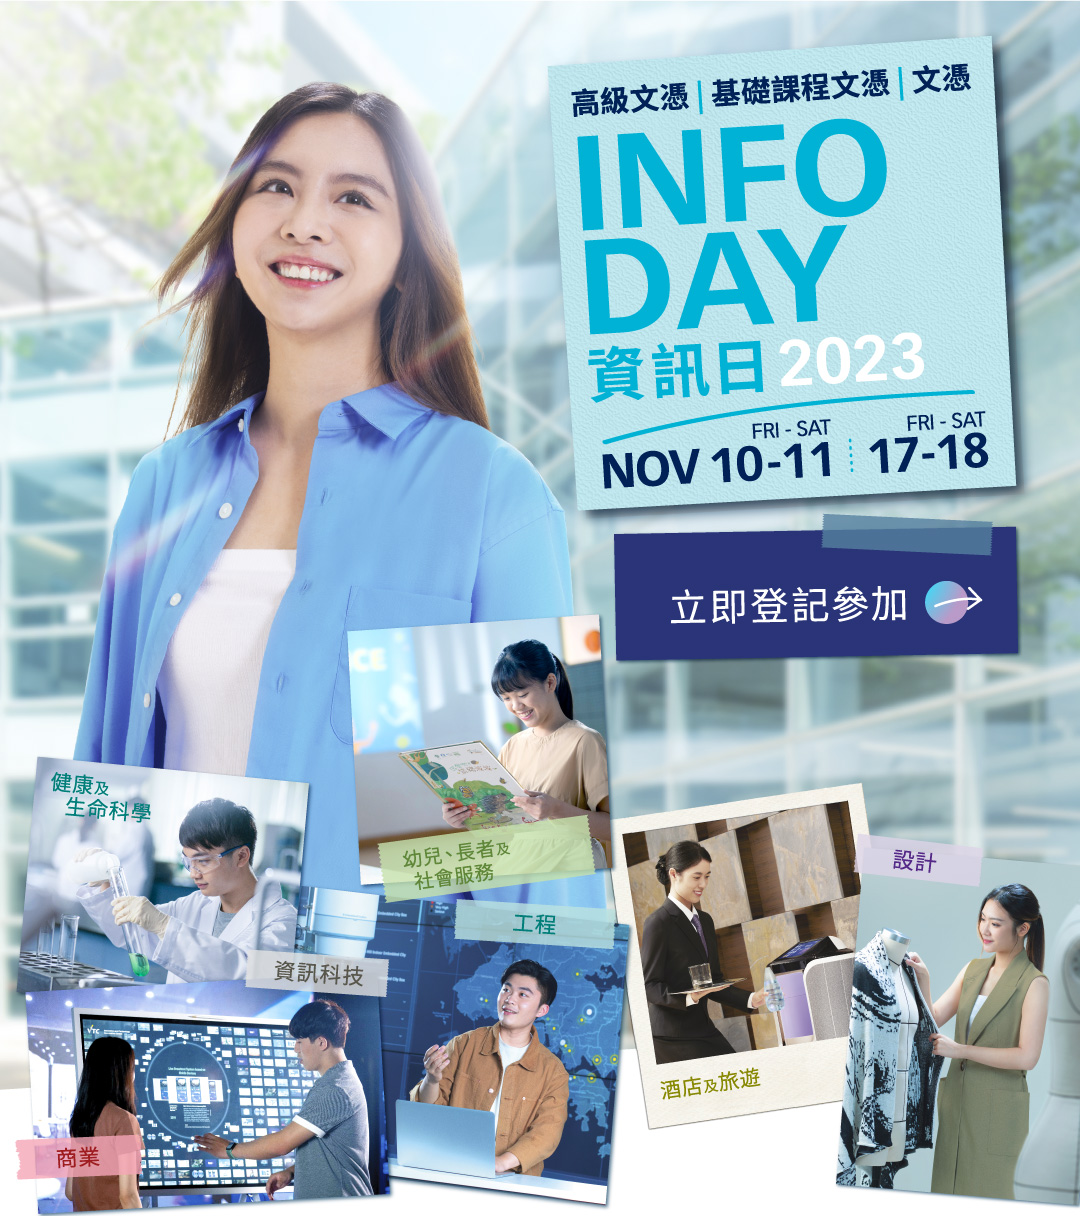 IVE Information Day